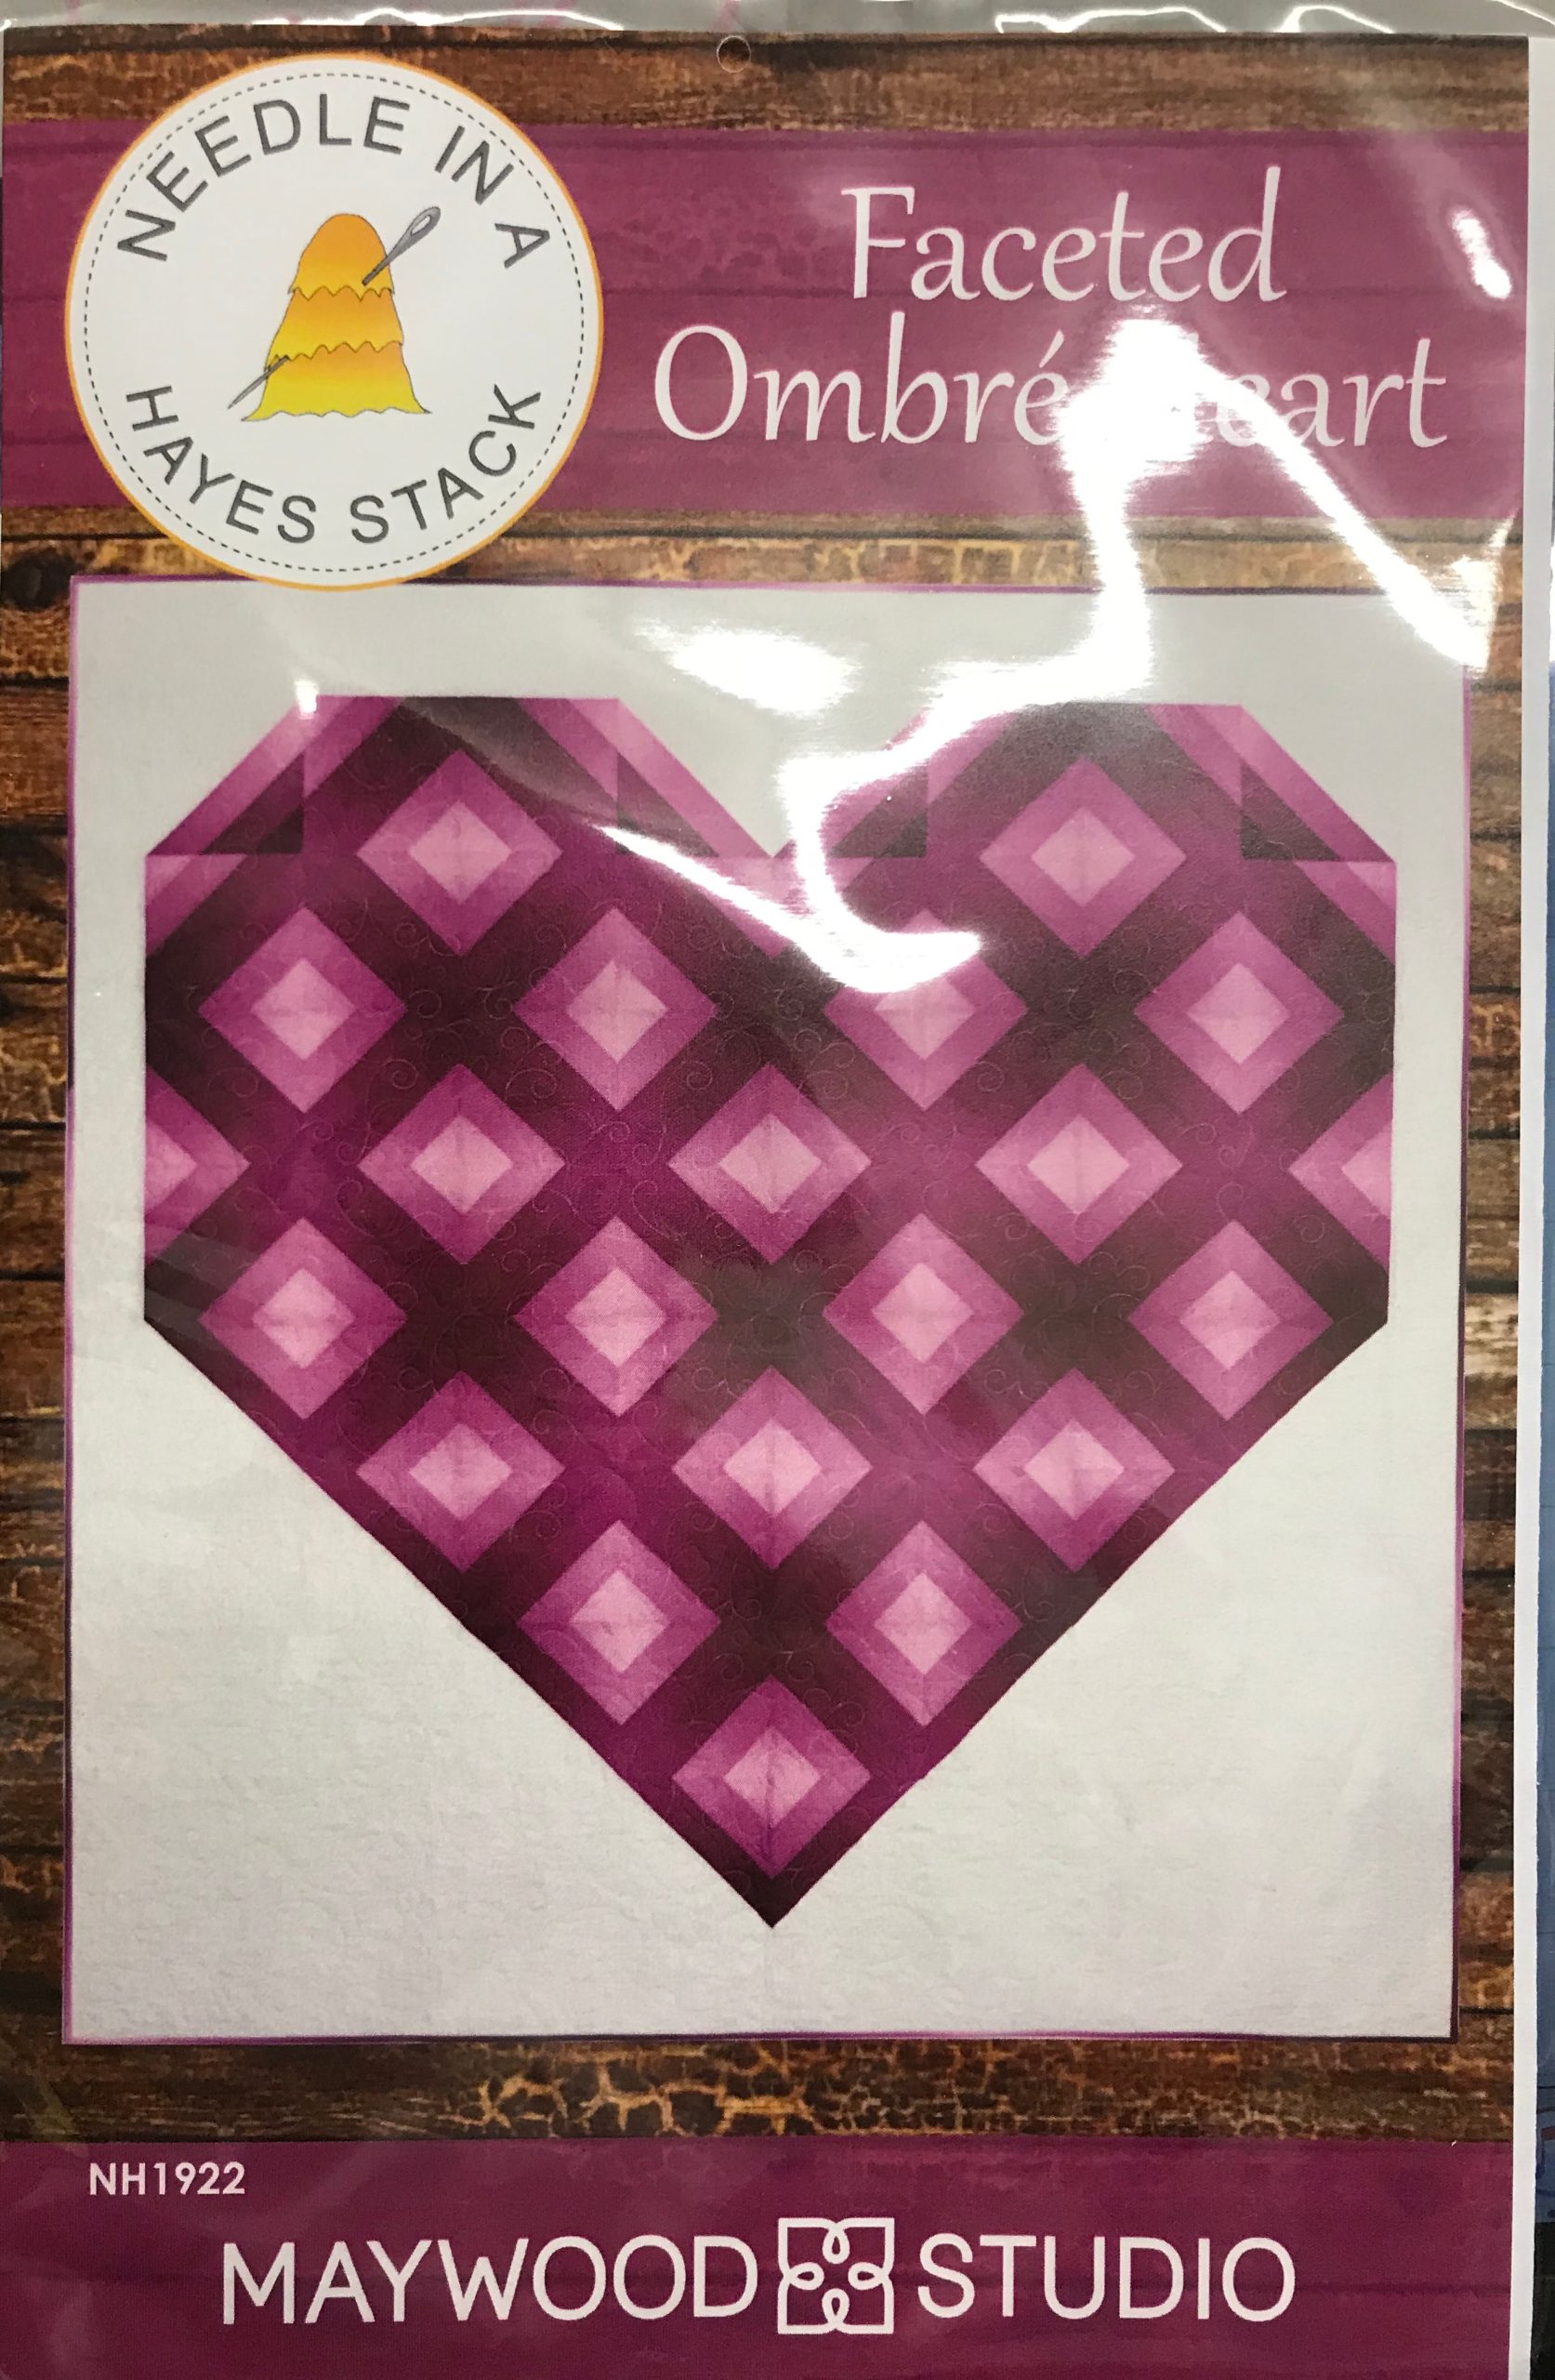 Faceted Ombre Heart Pattern